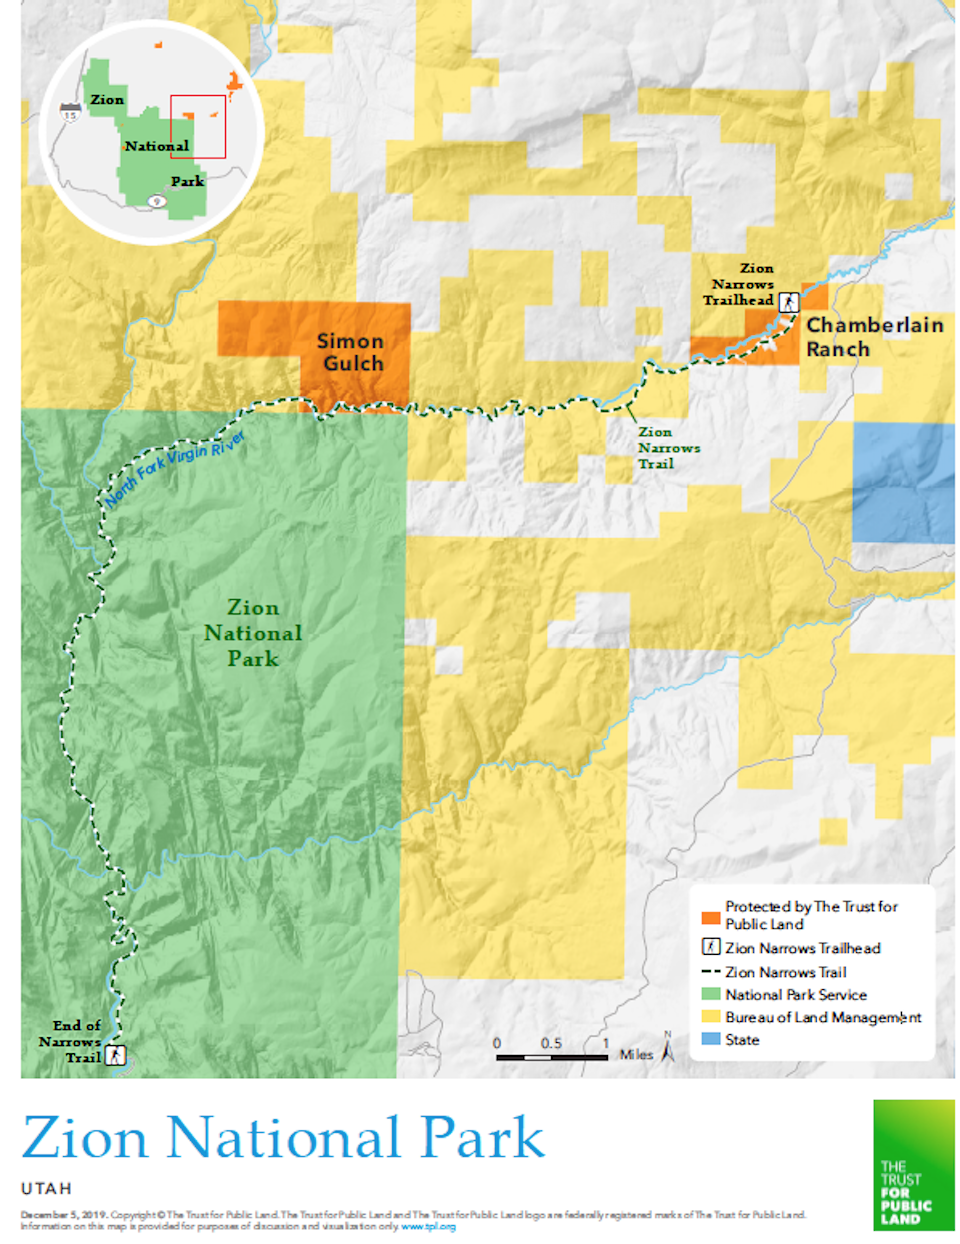 Map of the Zion Narrows Trail/Trust for Public Land